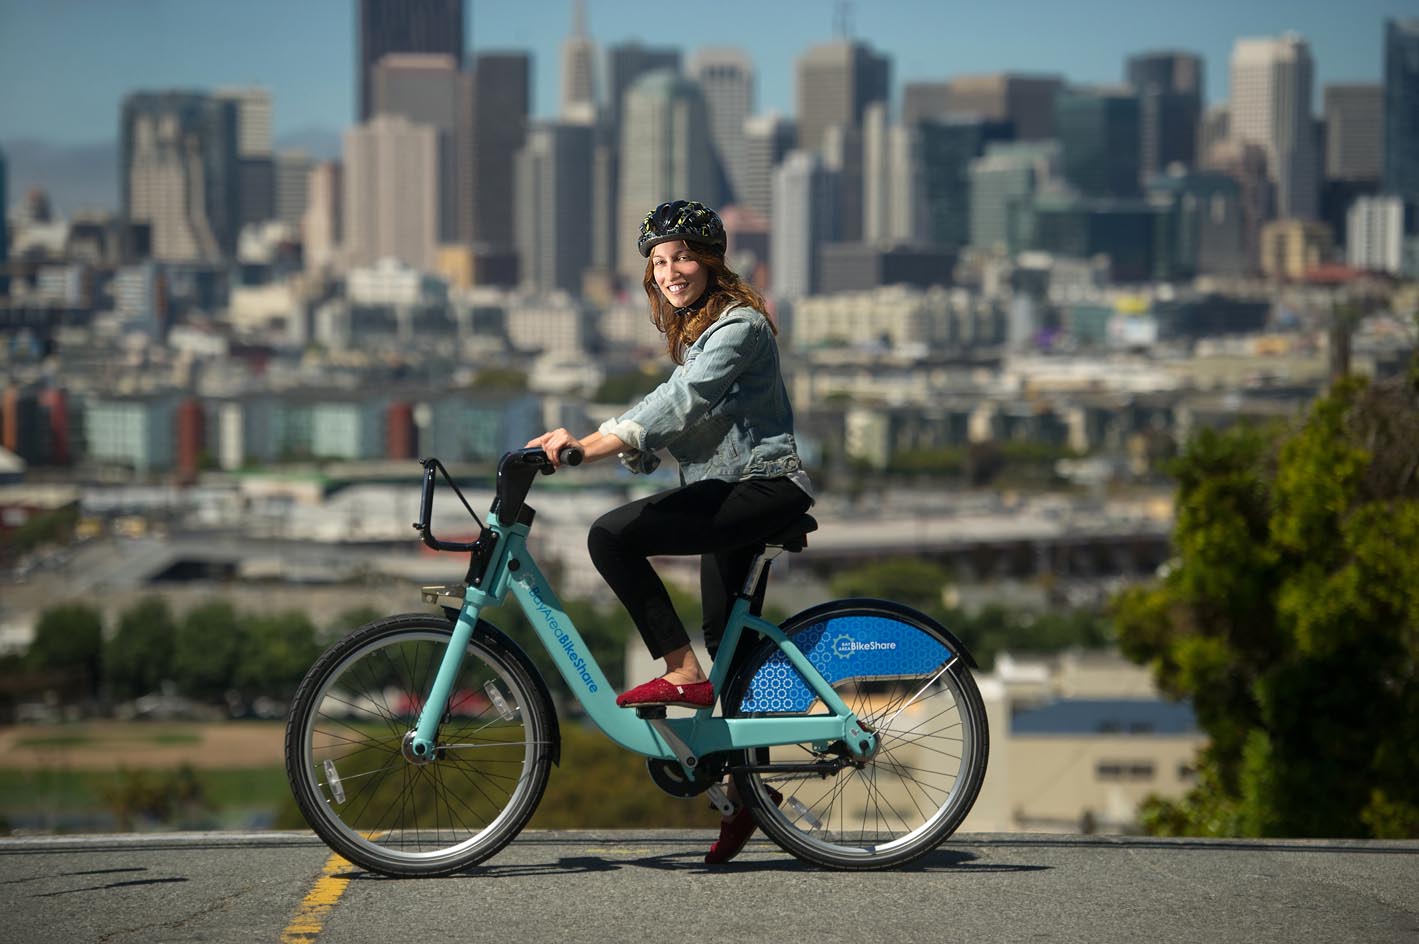 Bike share programs find way to recycle old batteries